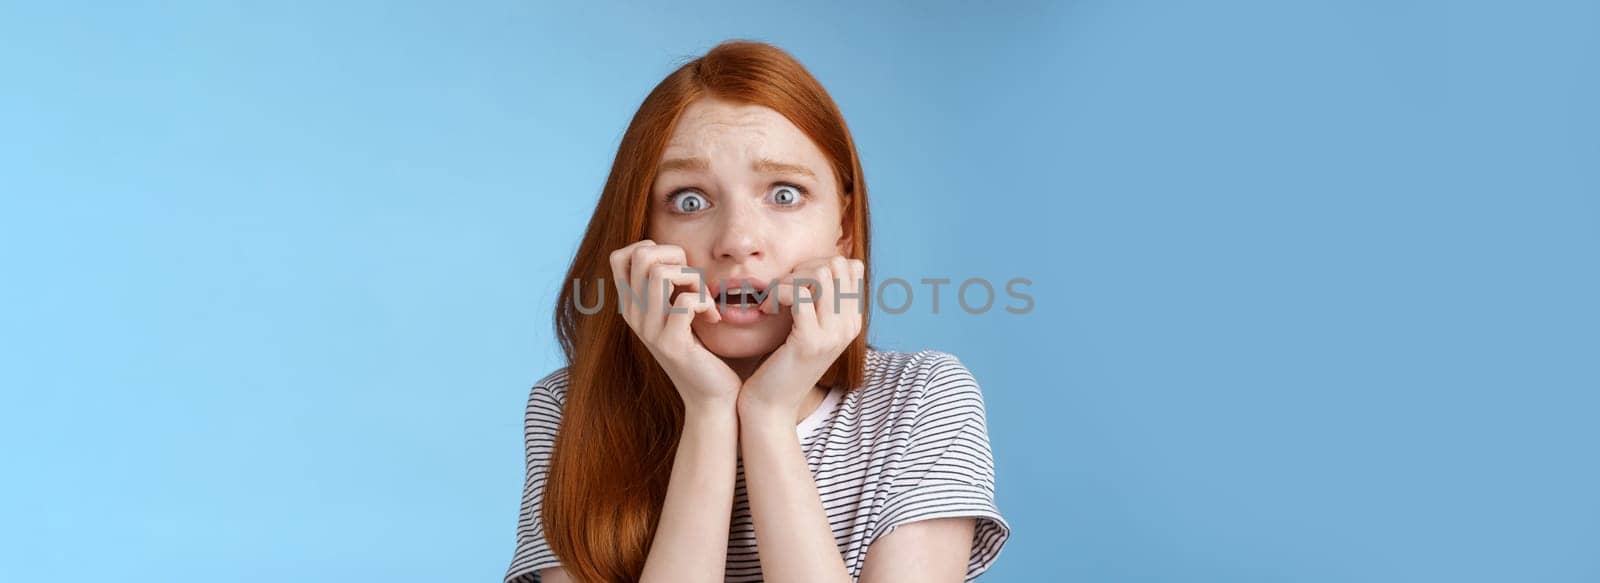 Scared speechless stunned frightened redhead girl trembling fear wide eyes terrified biting fingernails frowning shaking anxiously standing blue background gasping shocked. Emotions concept